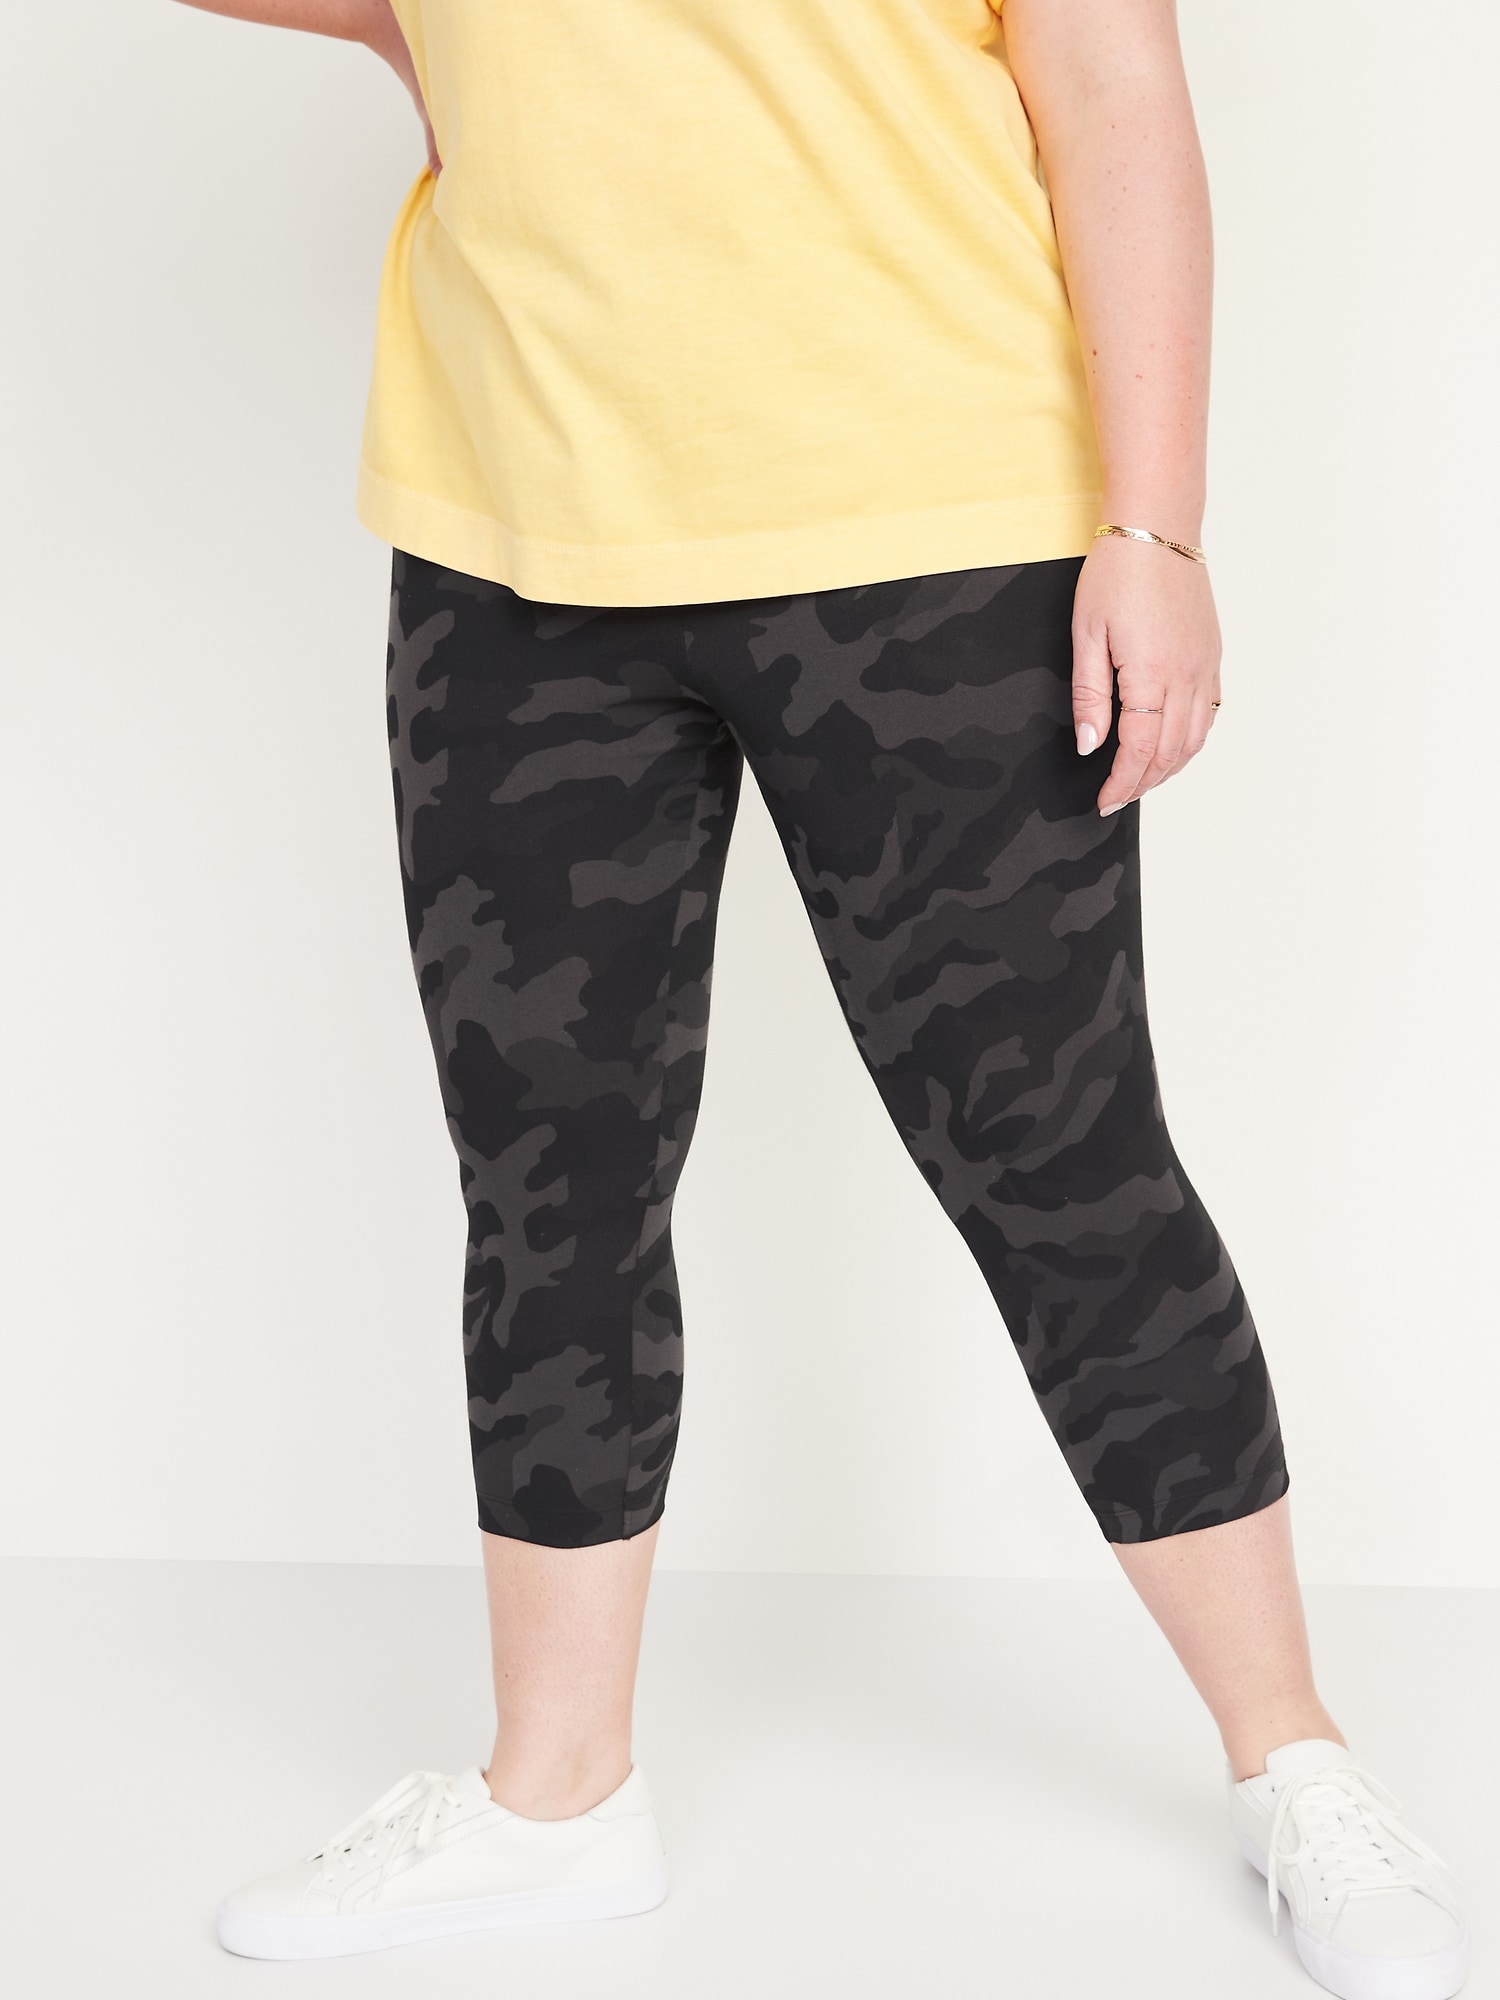 High-Waisted Printed Cropped Leggings For Women